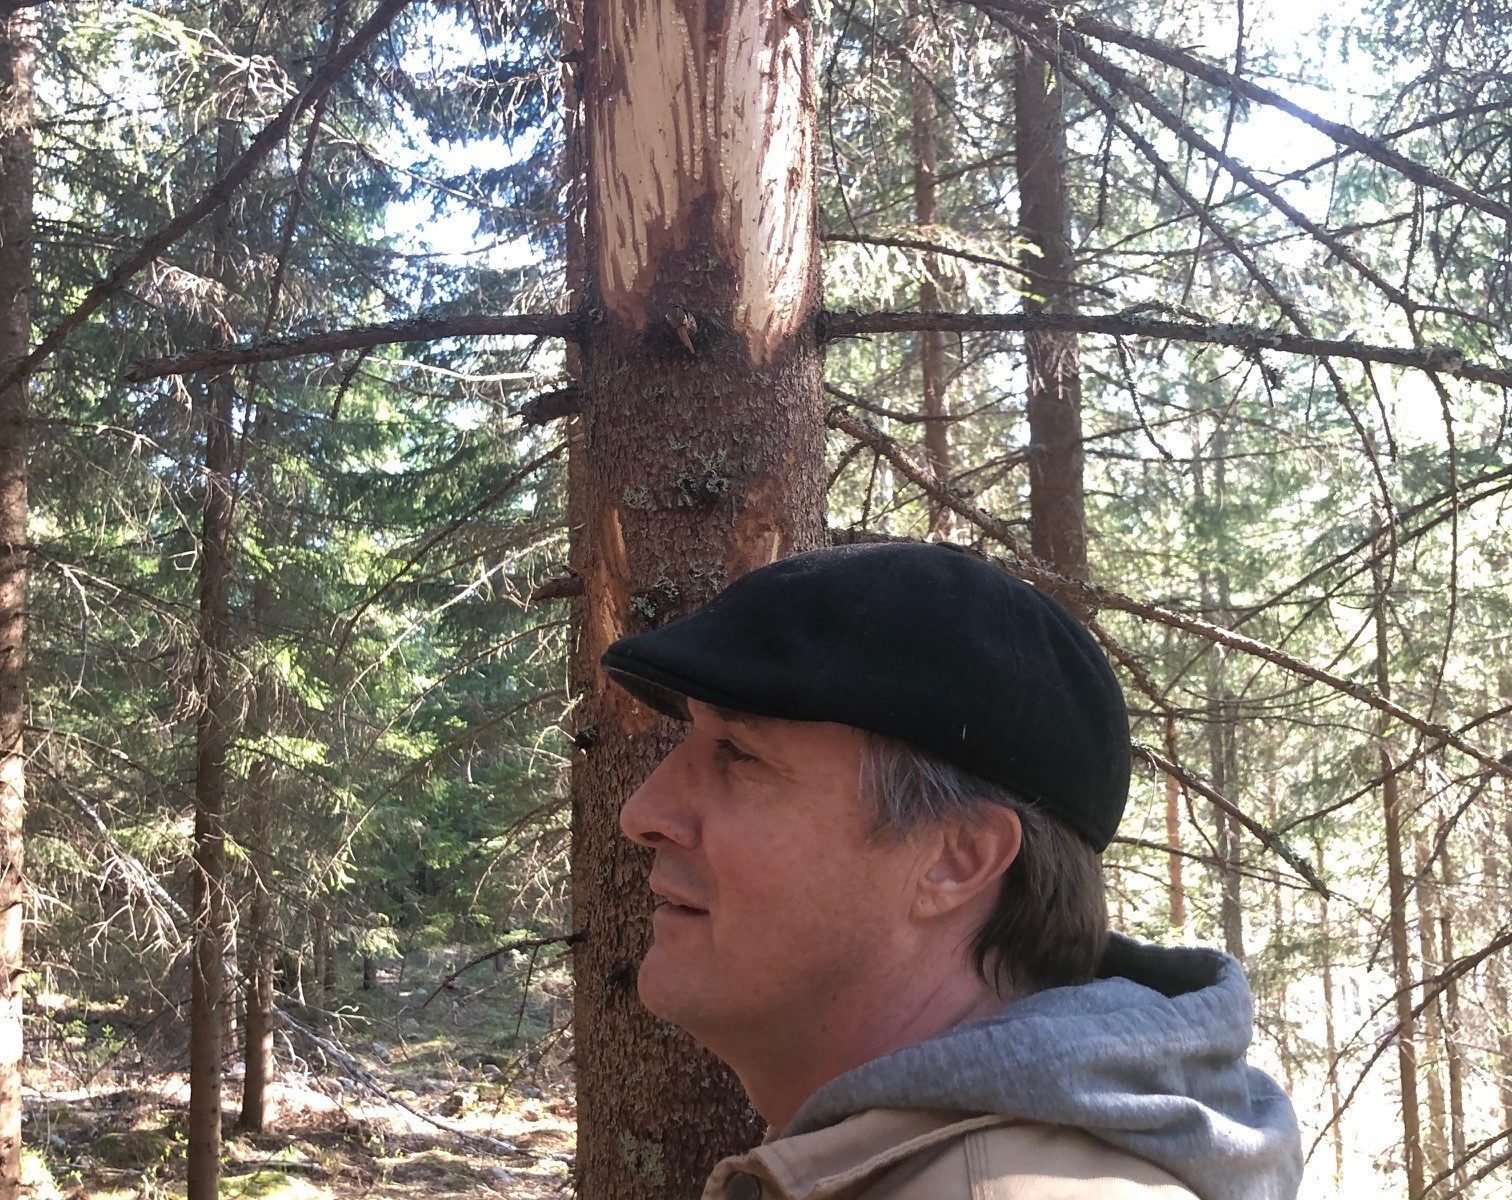 Man stands next to tree with moose chew marks